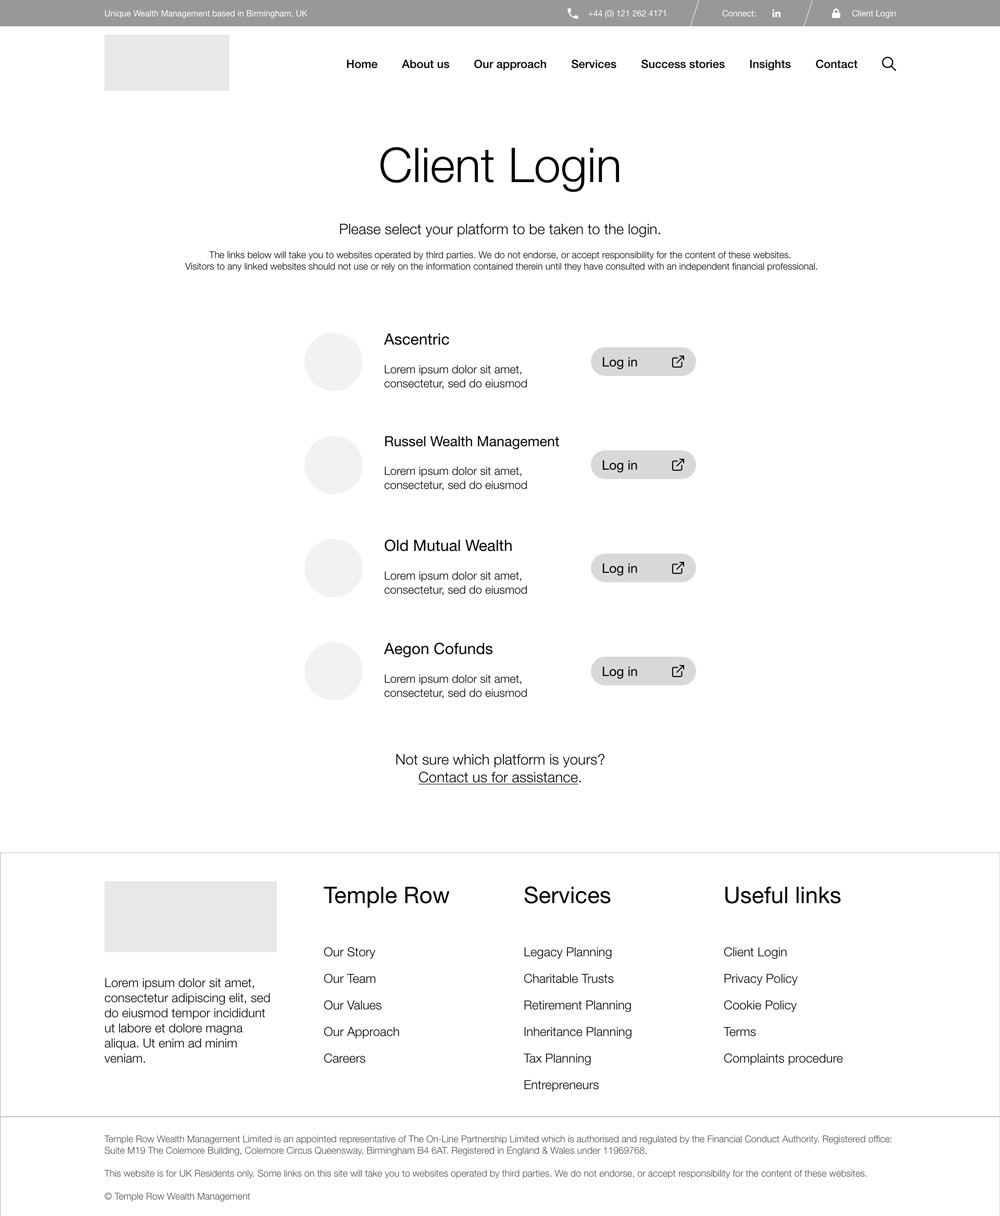 ethical-pixels-casestudy-temple-row-wealth-management-wireframe-21-client-login